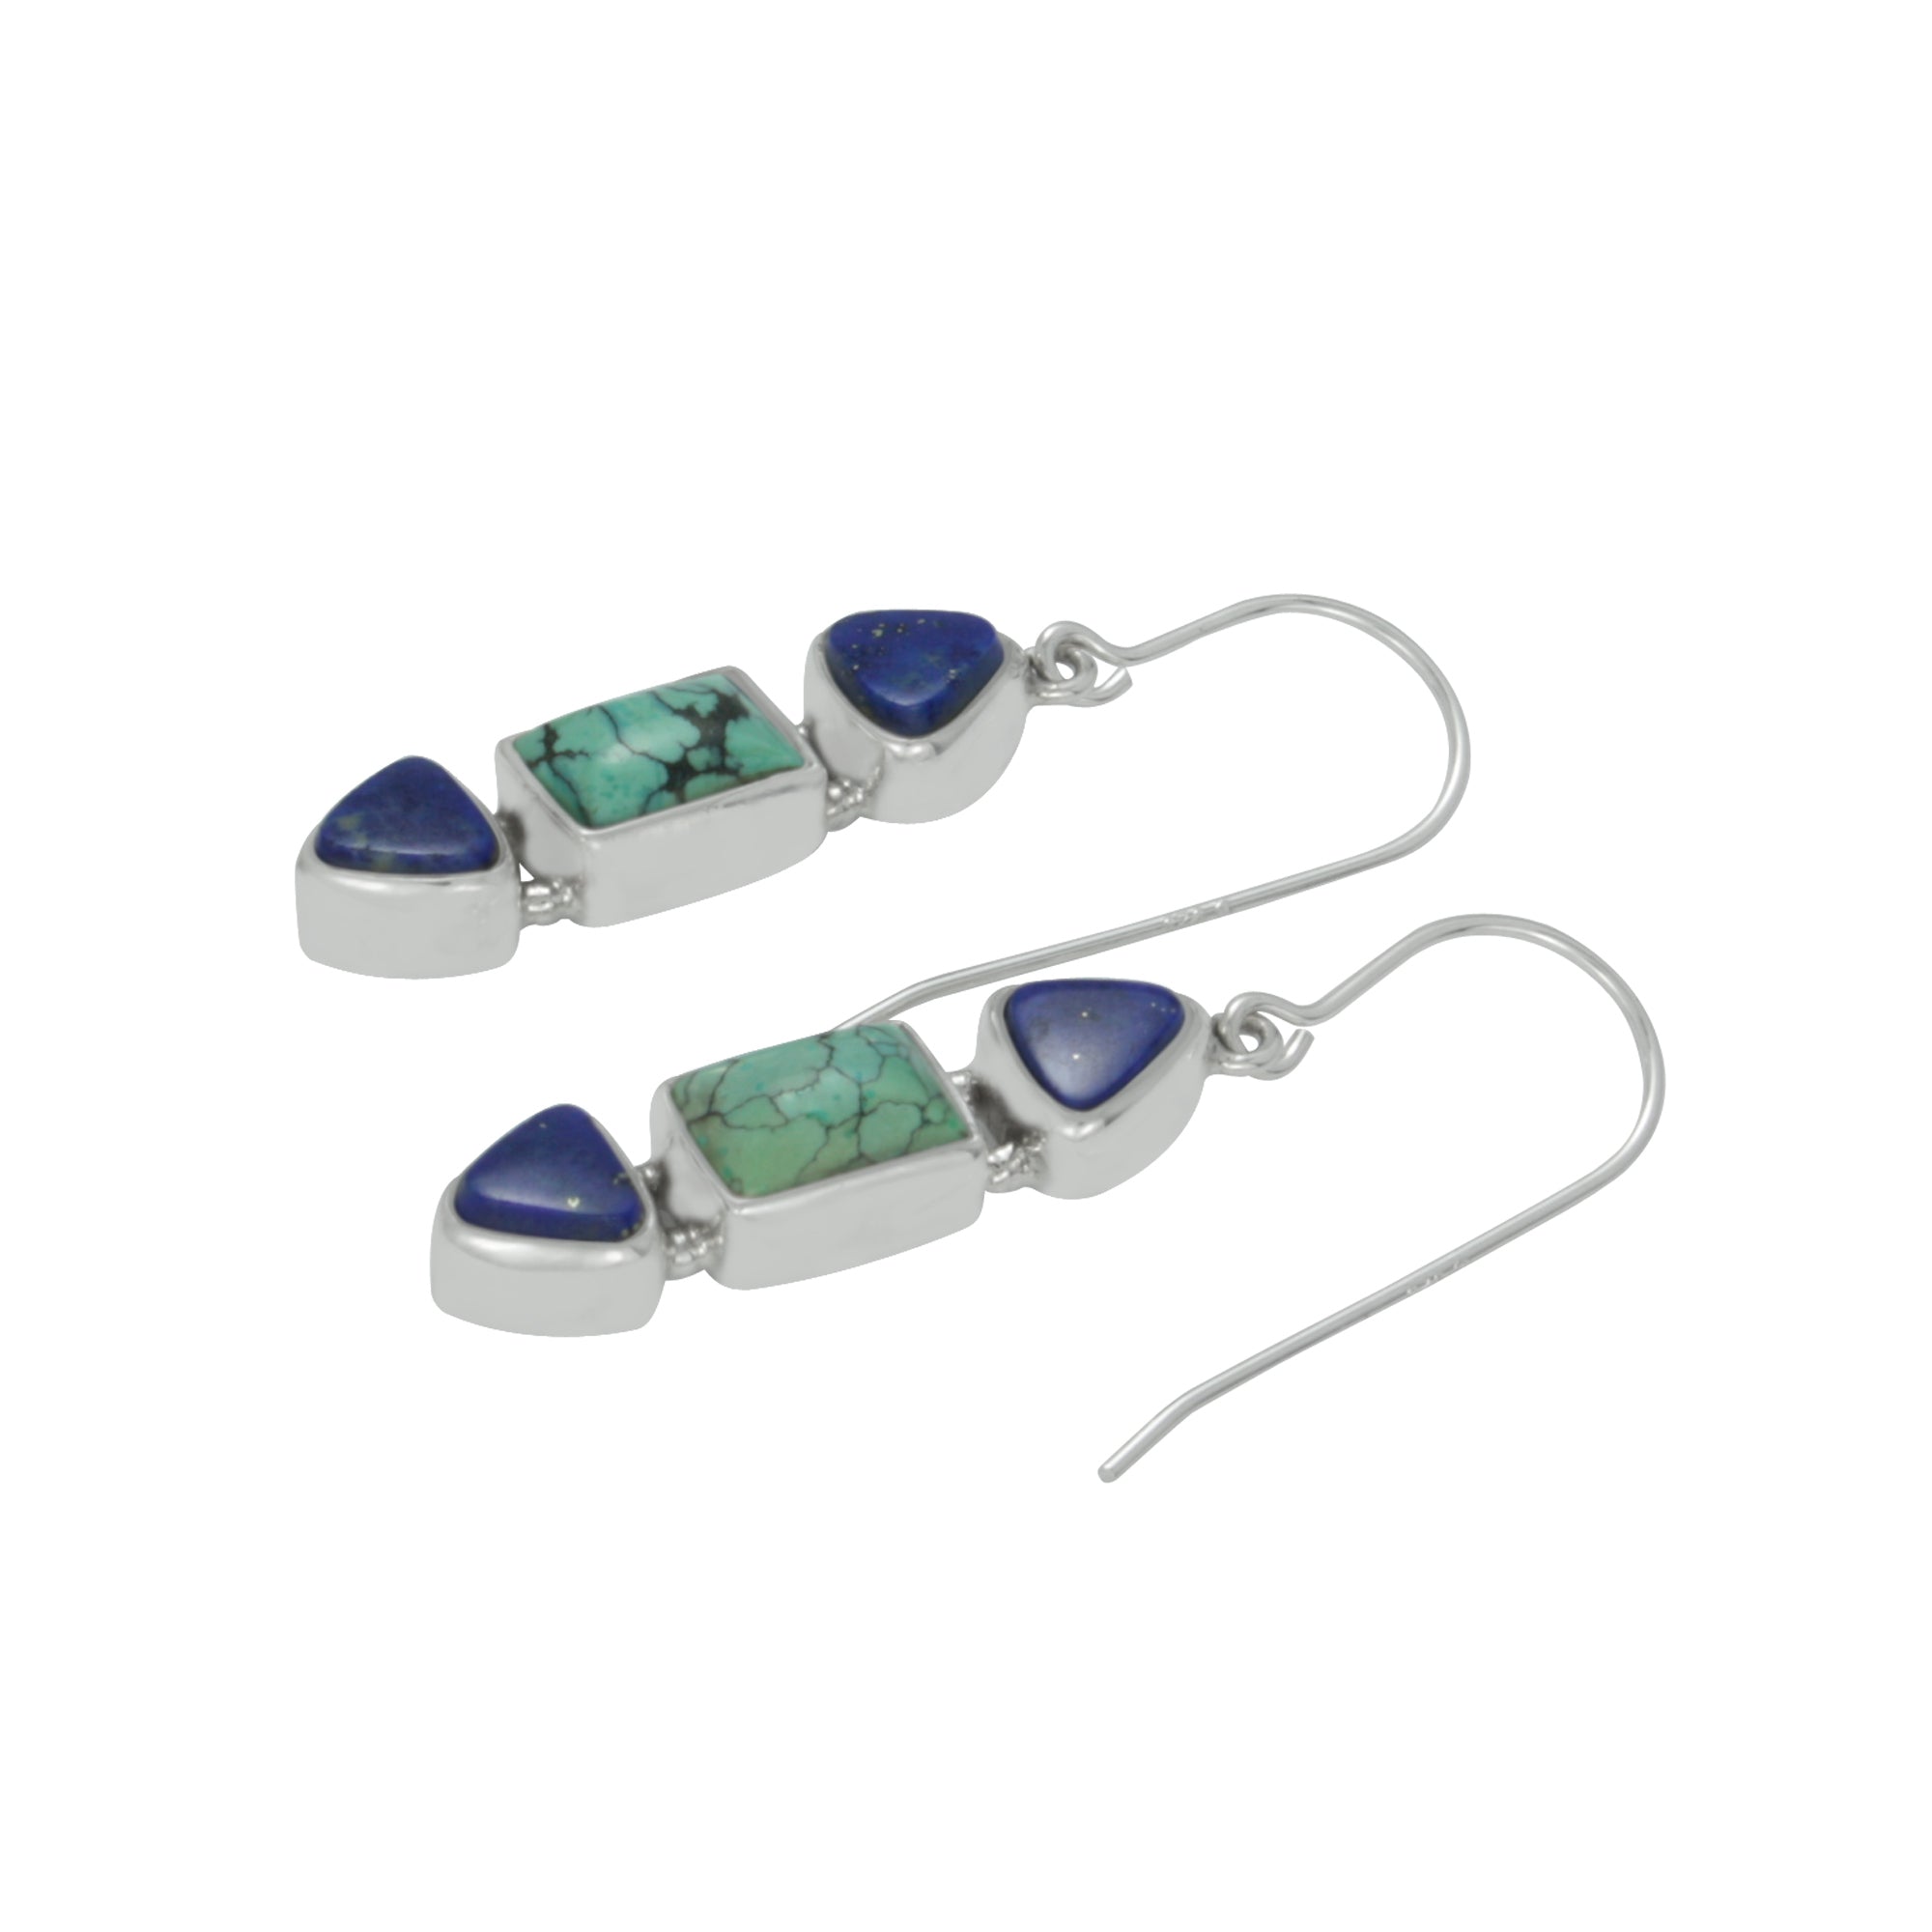 The Best of the Blues ! Turquoise and Lapis drop dead gorgeous earring!!